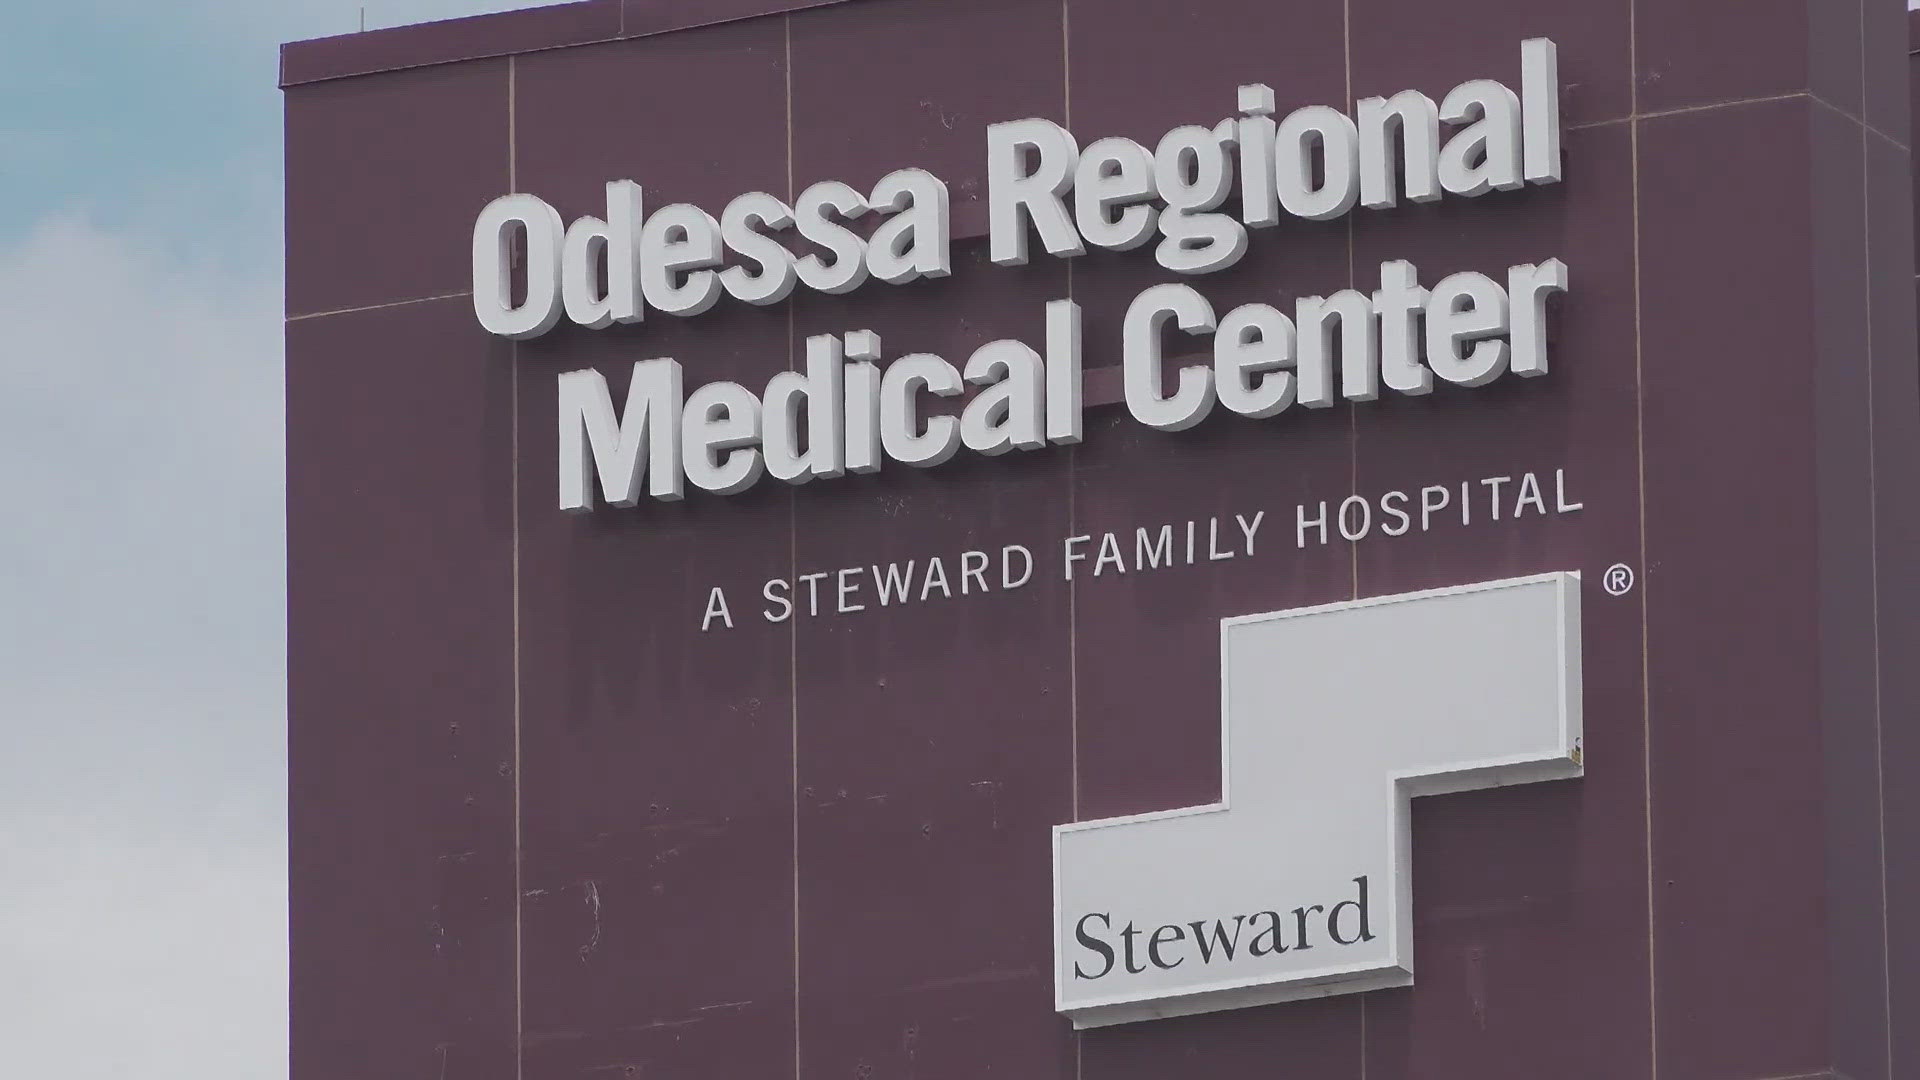 Steward Health Care operates hospitals in Ohio, Massachusetts and Texas. The company blames a "challenging work environment" for its financial downfall.